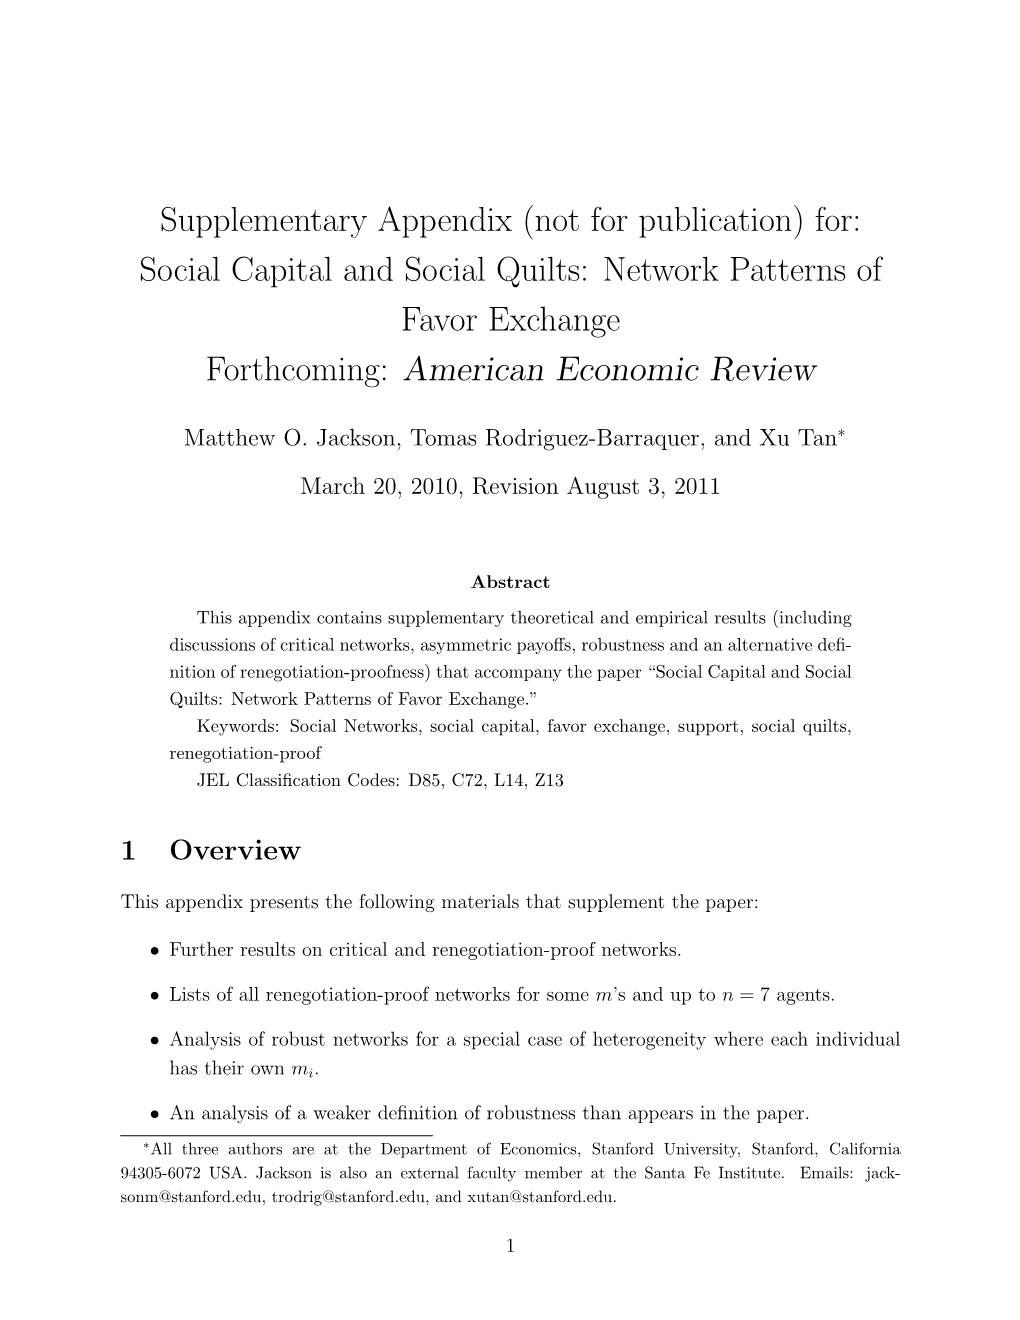 Supplementary Appendix (Not for Publication) For: Social Capital and Social Quilts: Network Patterns of Favor Exchange Forthcoming: American Economic Review